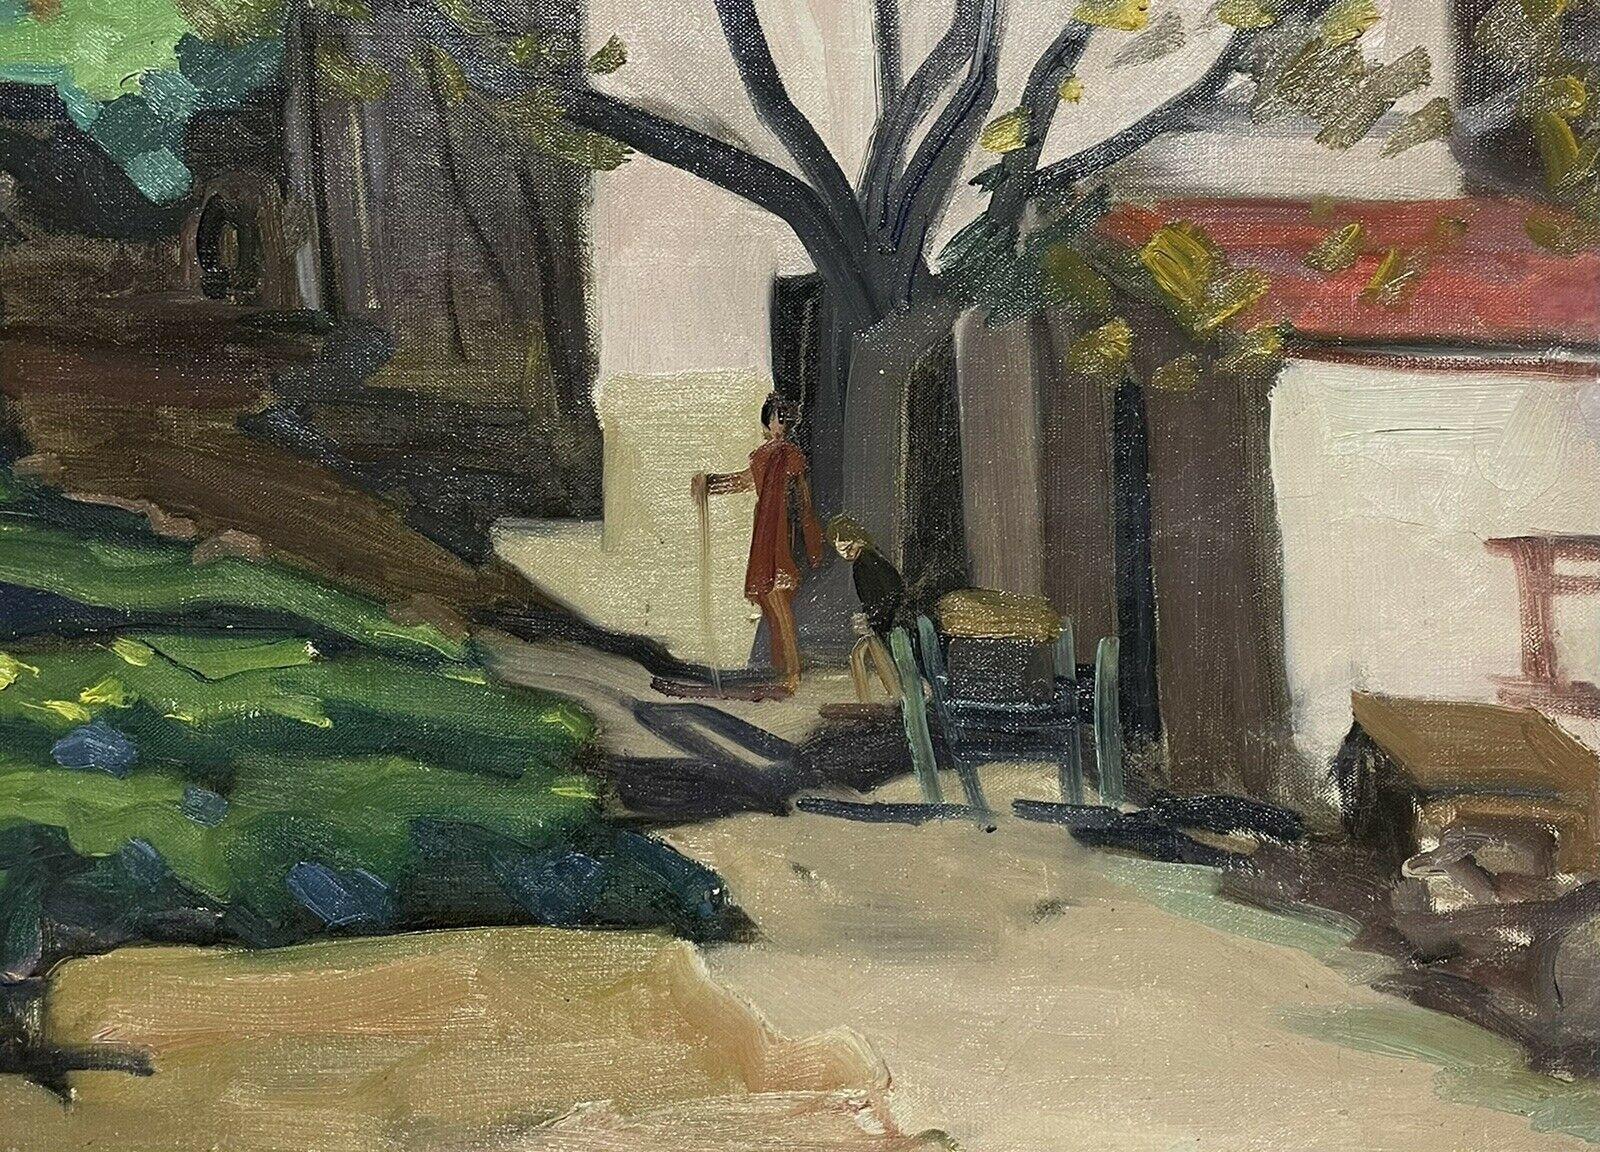 Artist/ School: French Post Impressionist School, circa 1950's

Title: Figures in a sloped Provencal village landscape

Medium: oil painting on canvas, unframed

canvas: 23.75 x 28.75 inches

Provenance: private collection, France

Condition: The